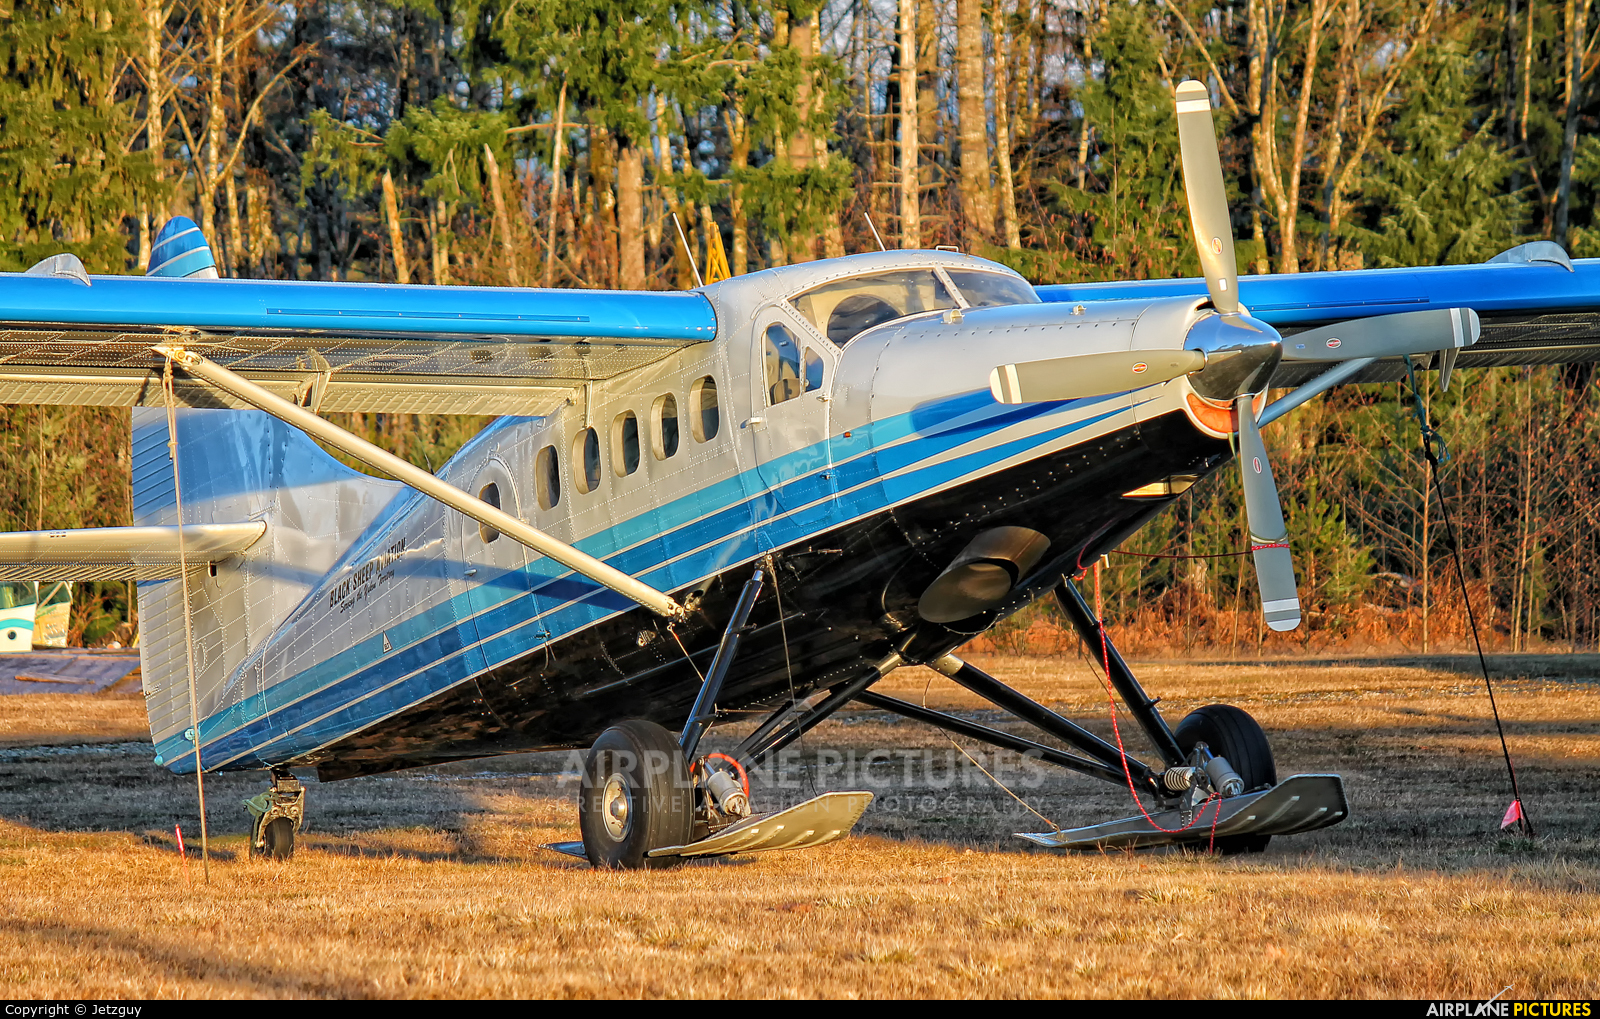 Private C-GDHW aircraft at Campbell River Airport